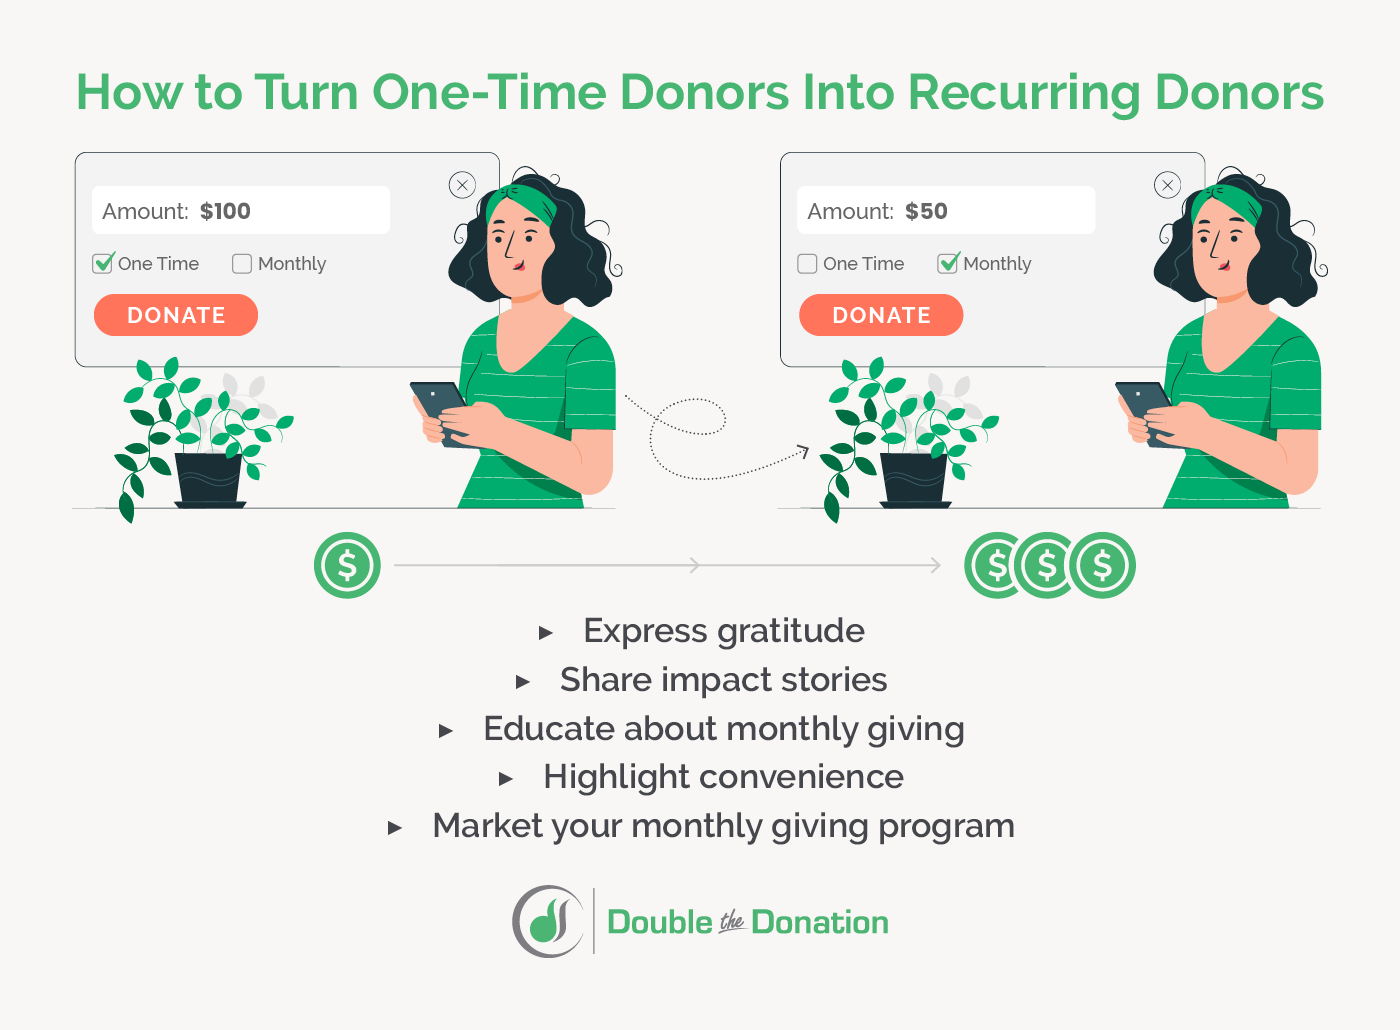 A list of ways nonprofits can turn one-time donors into recurring donors, which are listed in the text below.